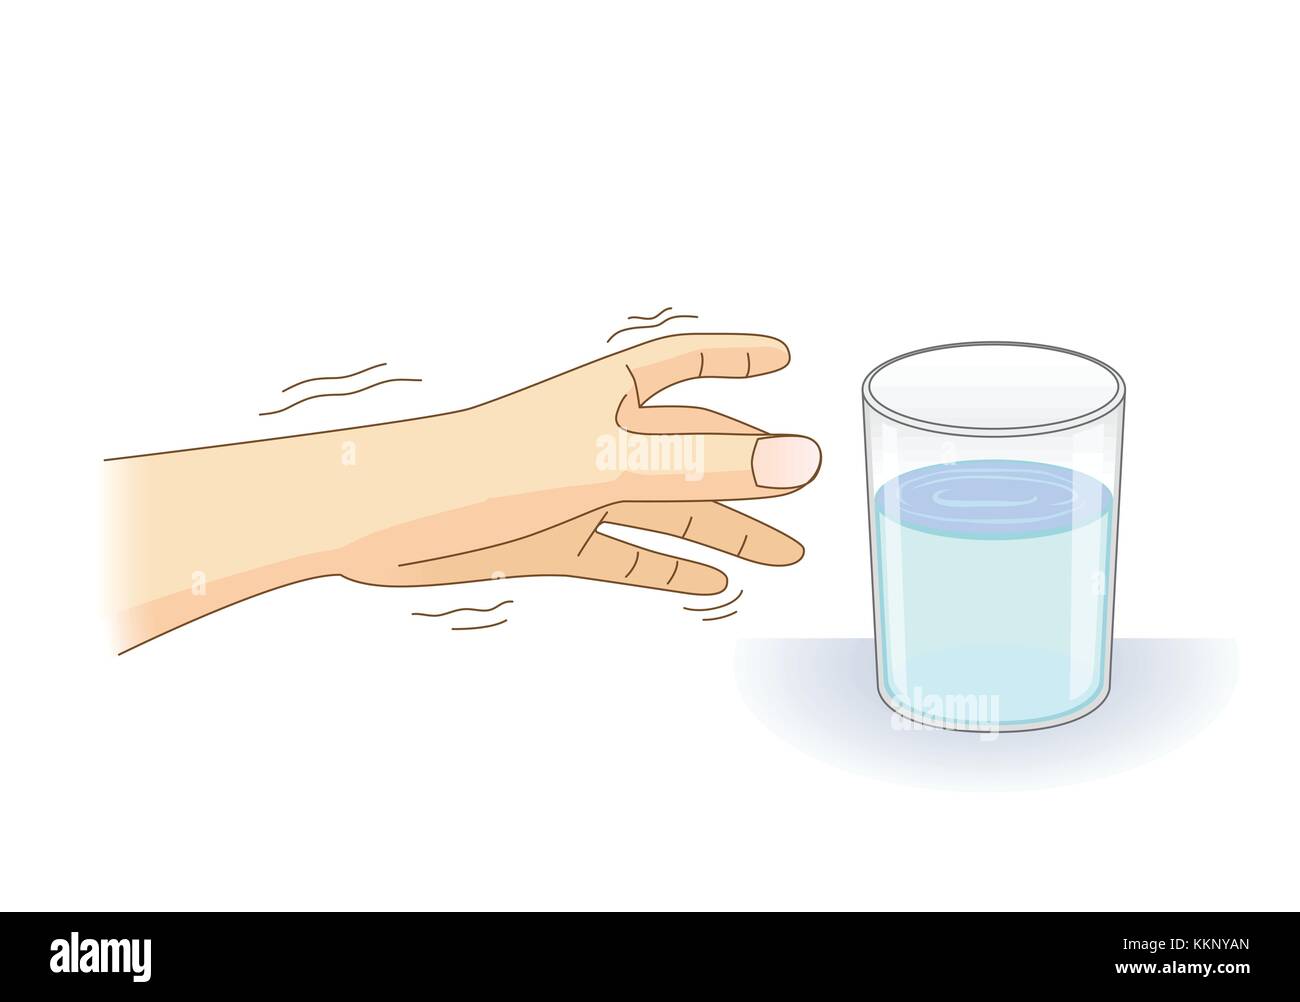 A Hand have tremor symptom reaching out for a glass of water. Stock Vector